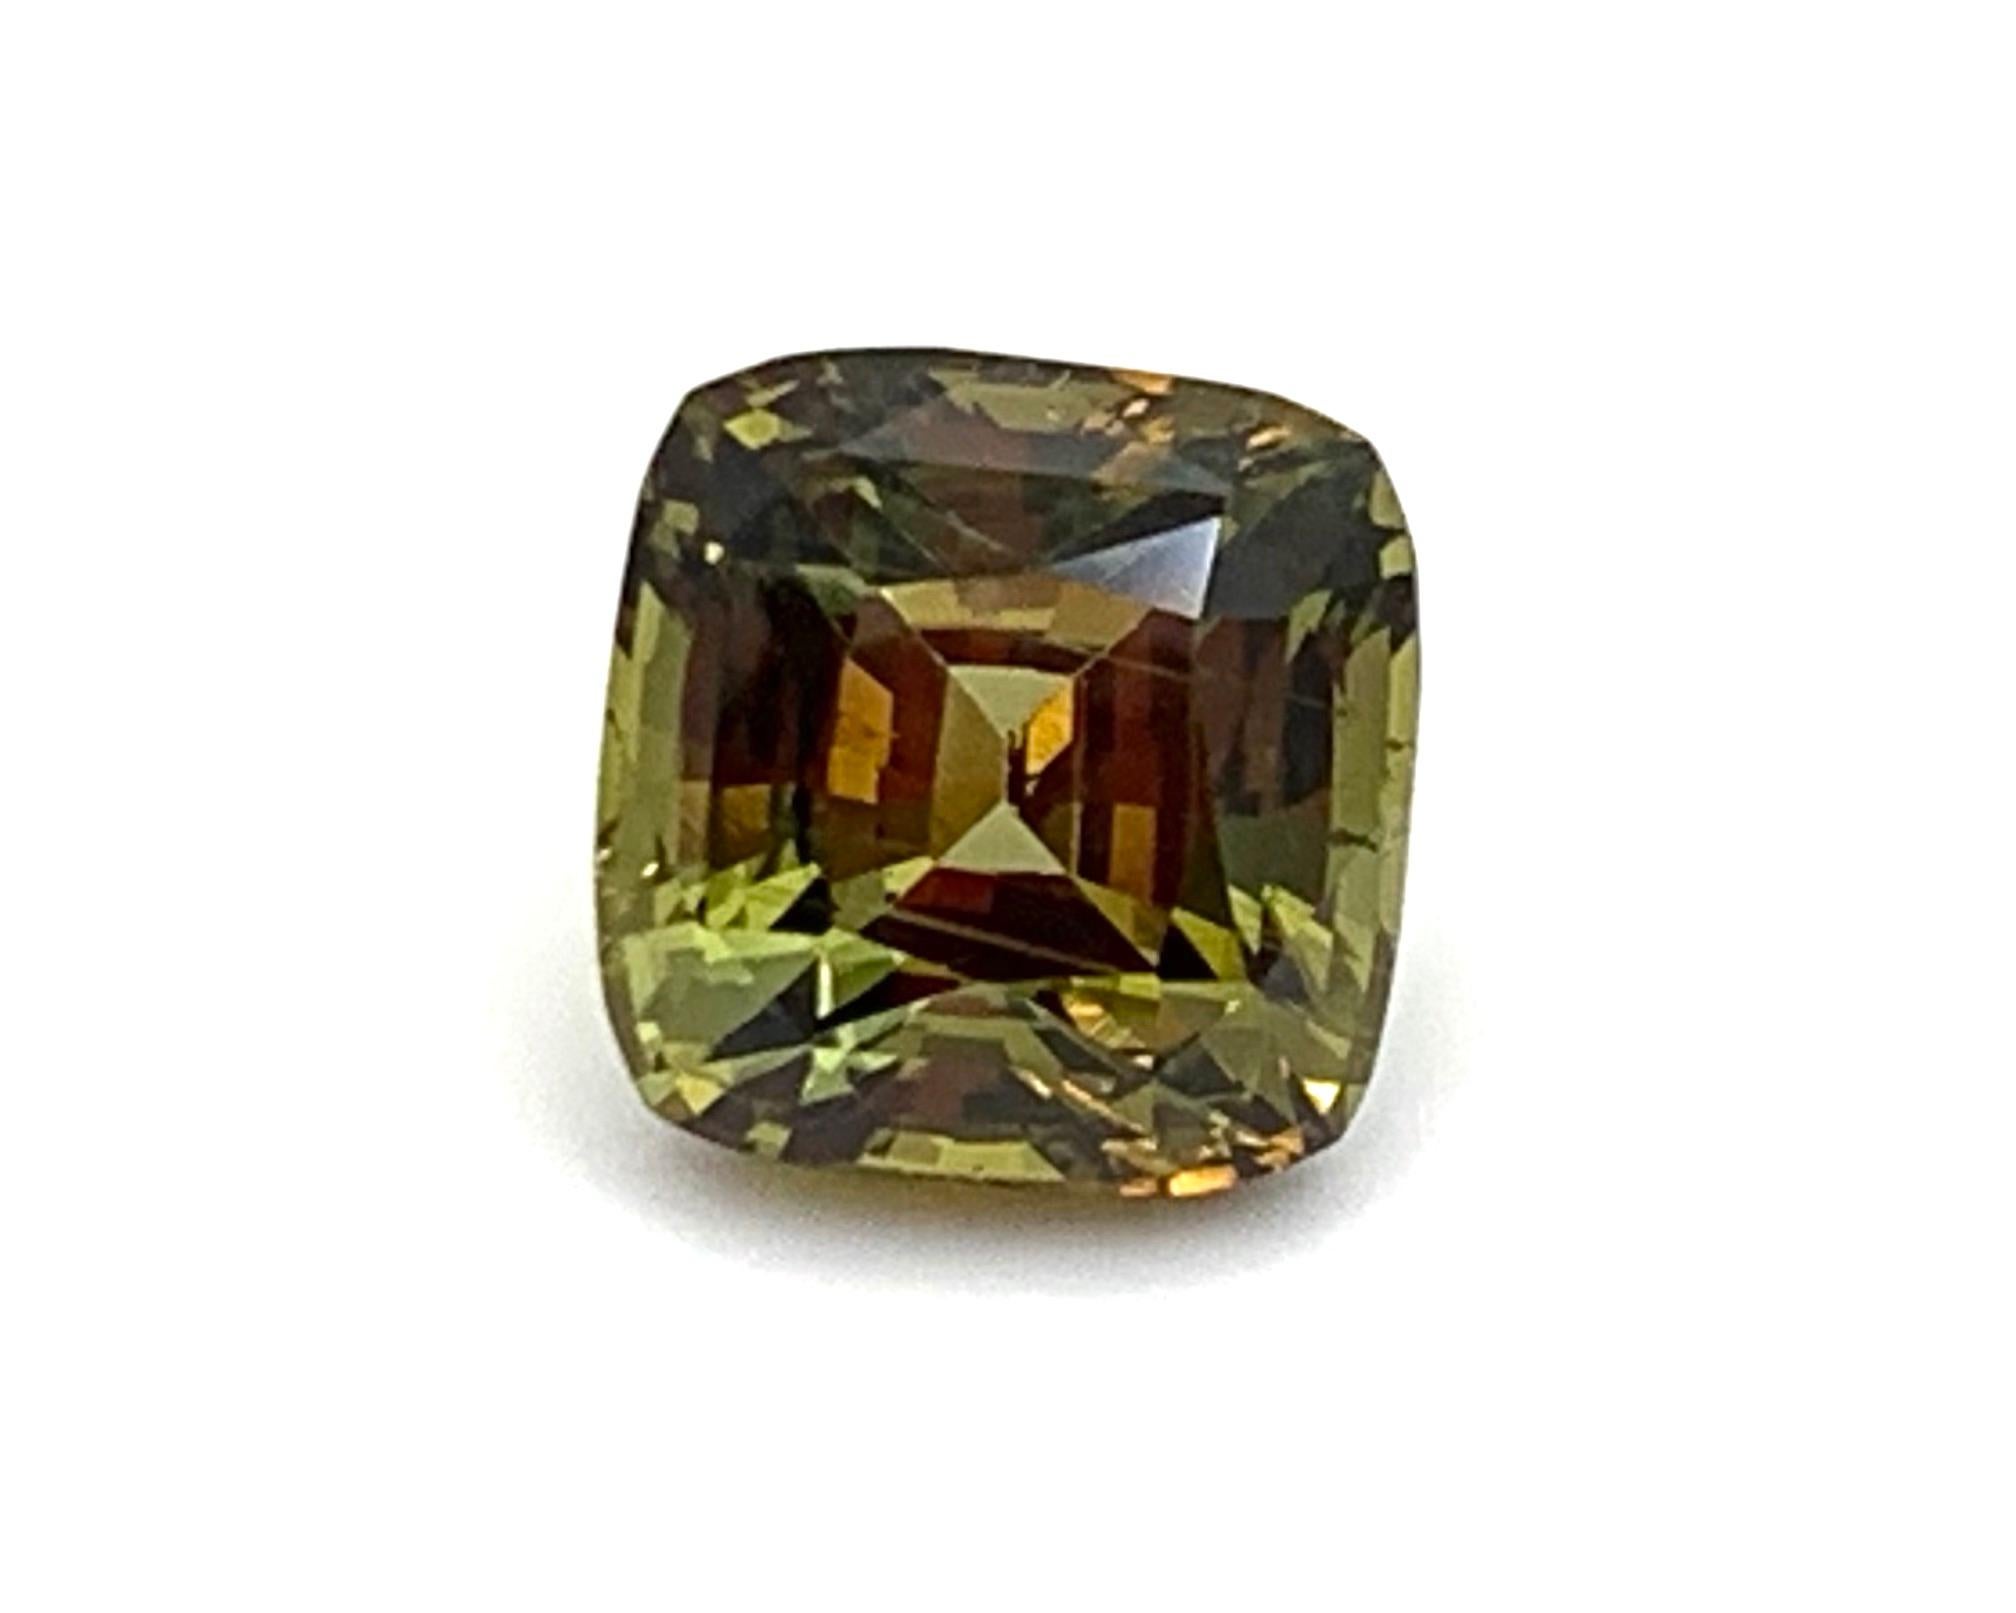 Women's or Men's 15.52 Carat Faceted Chrysoberyl Cushion, Unset Loose Gemstone For Sale